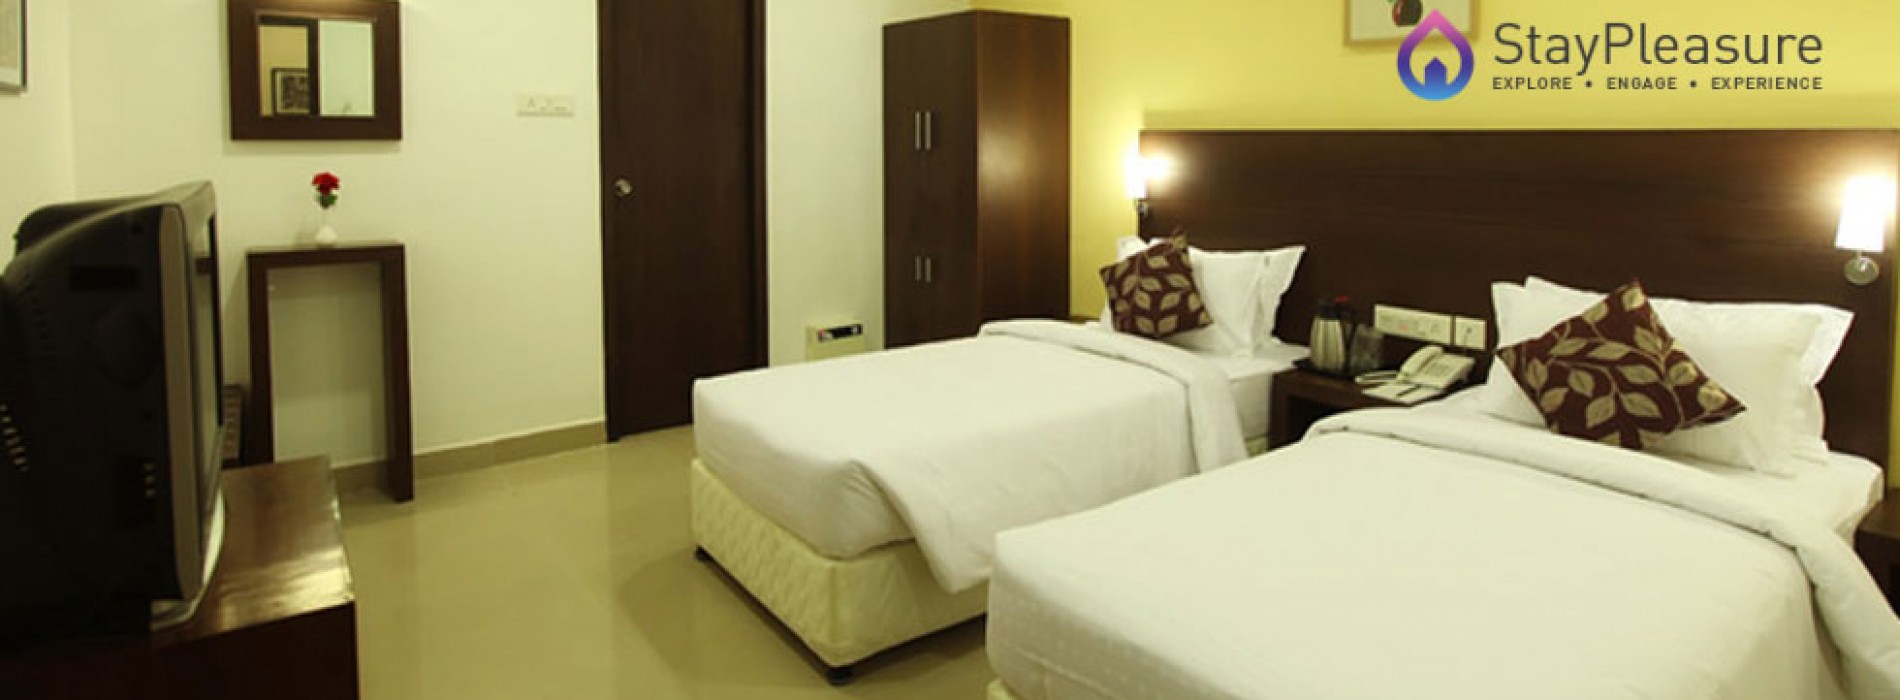 StayPleasure launches exclusive short stay online booking portal Pan India